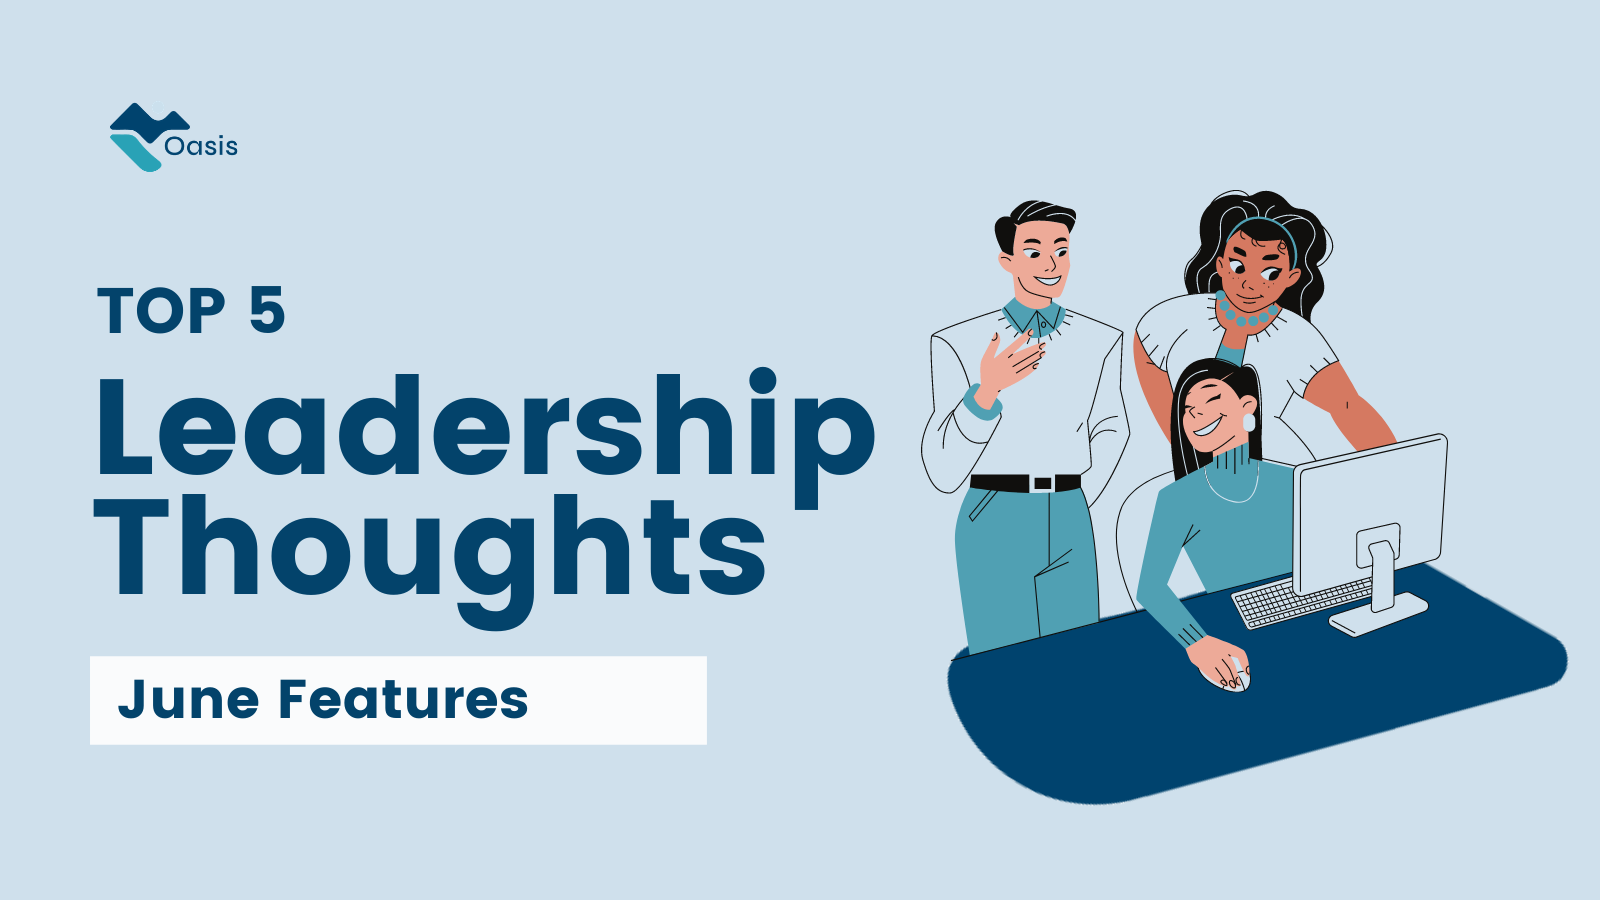 Top 5 leadership thoughts | Oasis June features